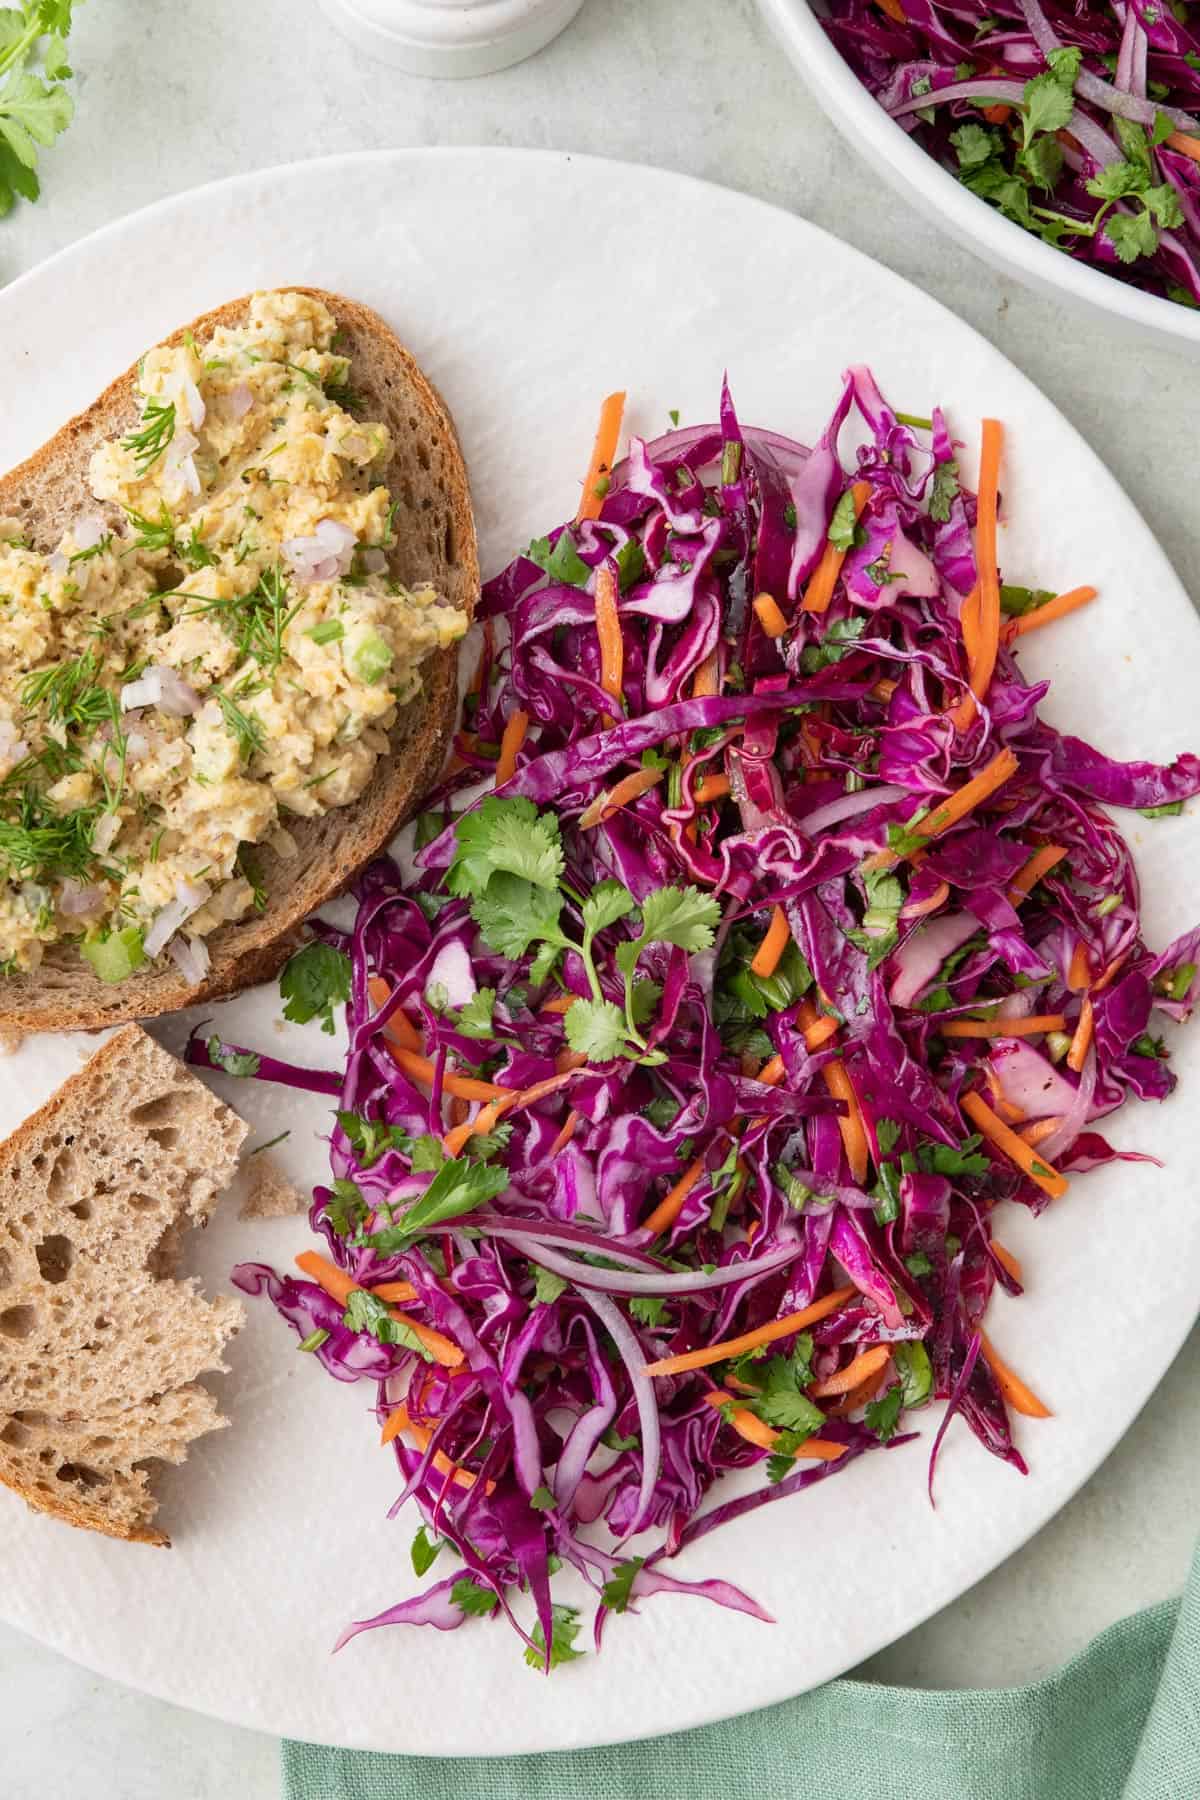 Large portion of red cabbage slaw on plate with half an open-faced chickpea salad sandwich next to it.